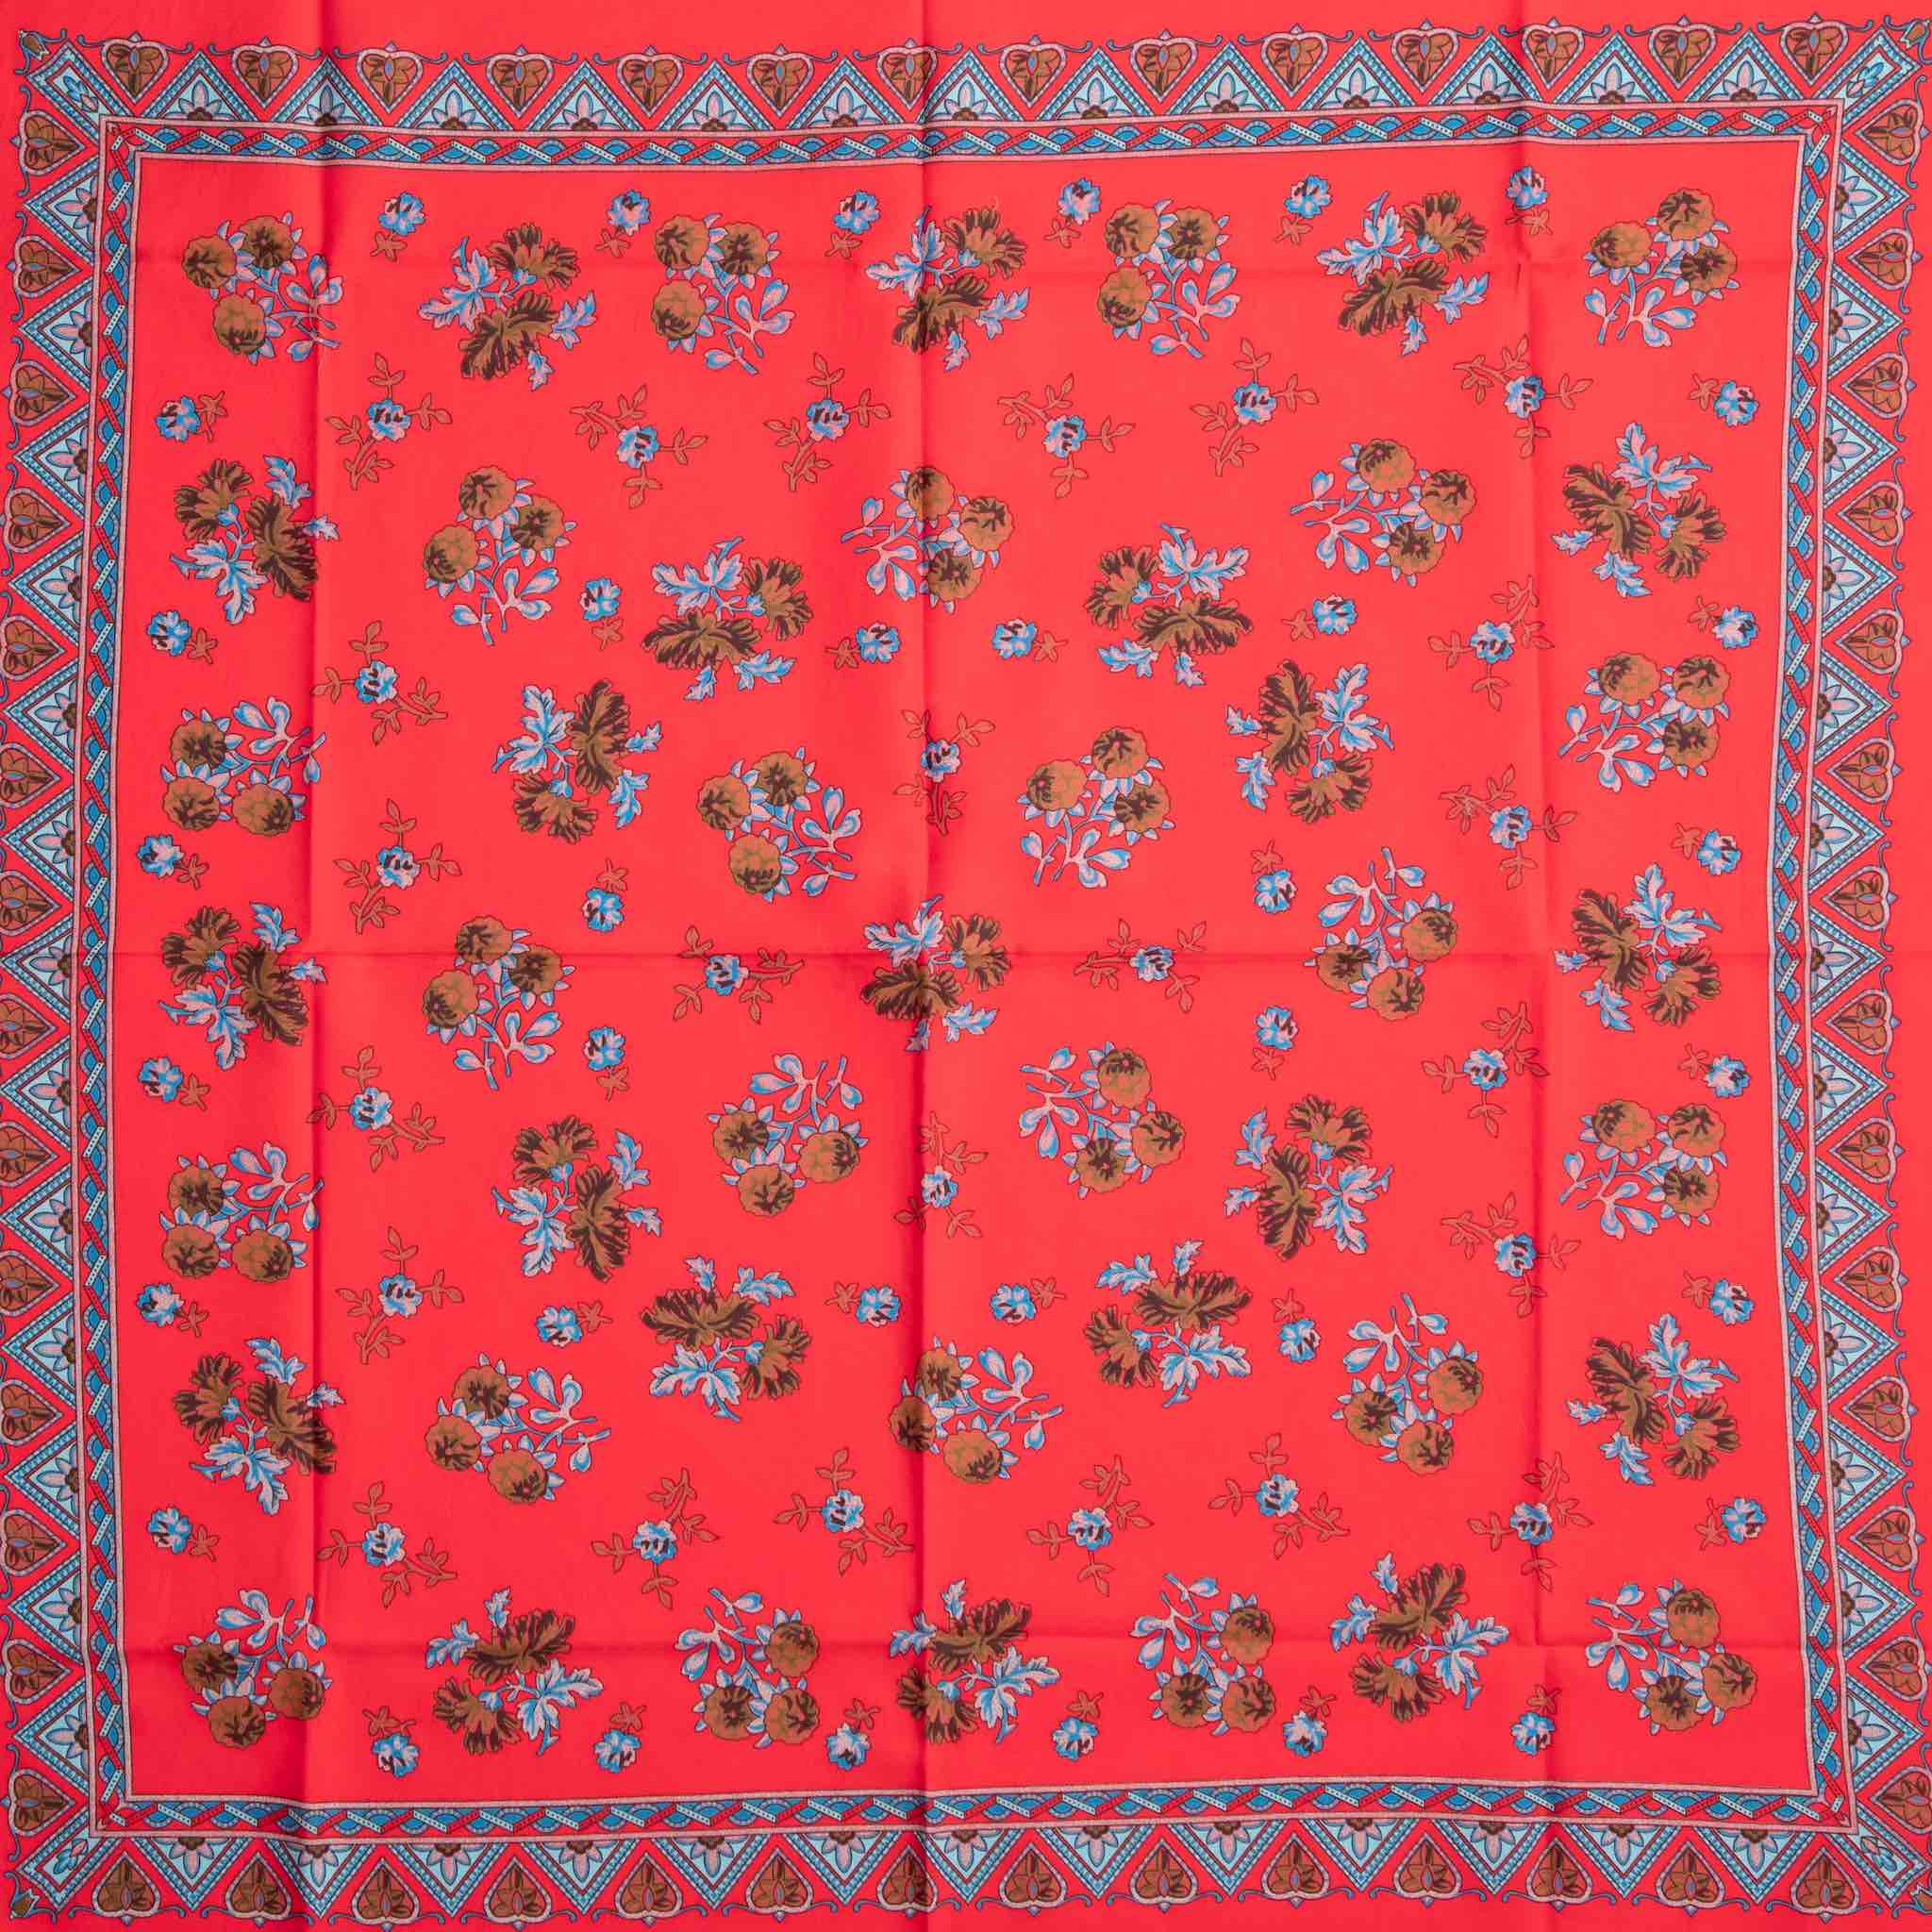 red and blue fabric for shawls for folk groups